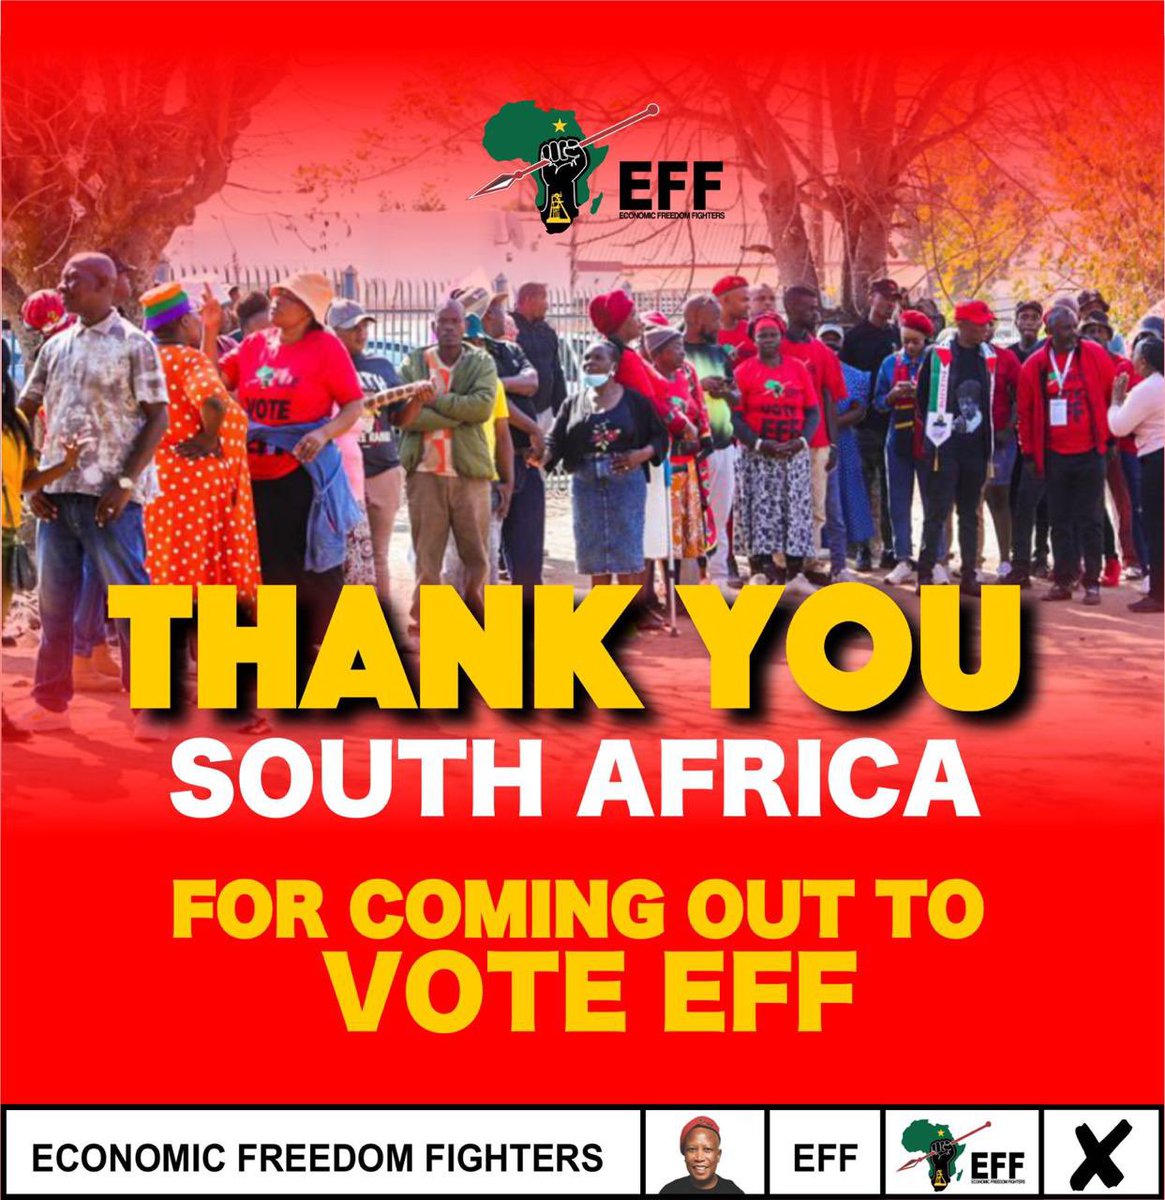 It's not over mafighters NOT yet, basheshe bahleka kanti God is working ✊🏿✊🏿✊🏿 I thank you Fighters and I love you so much 
❤💚🖤 #ThankYouEFF